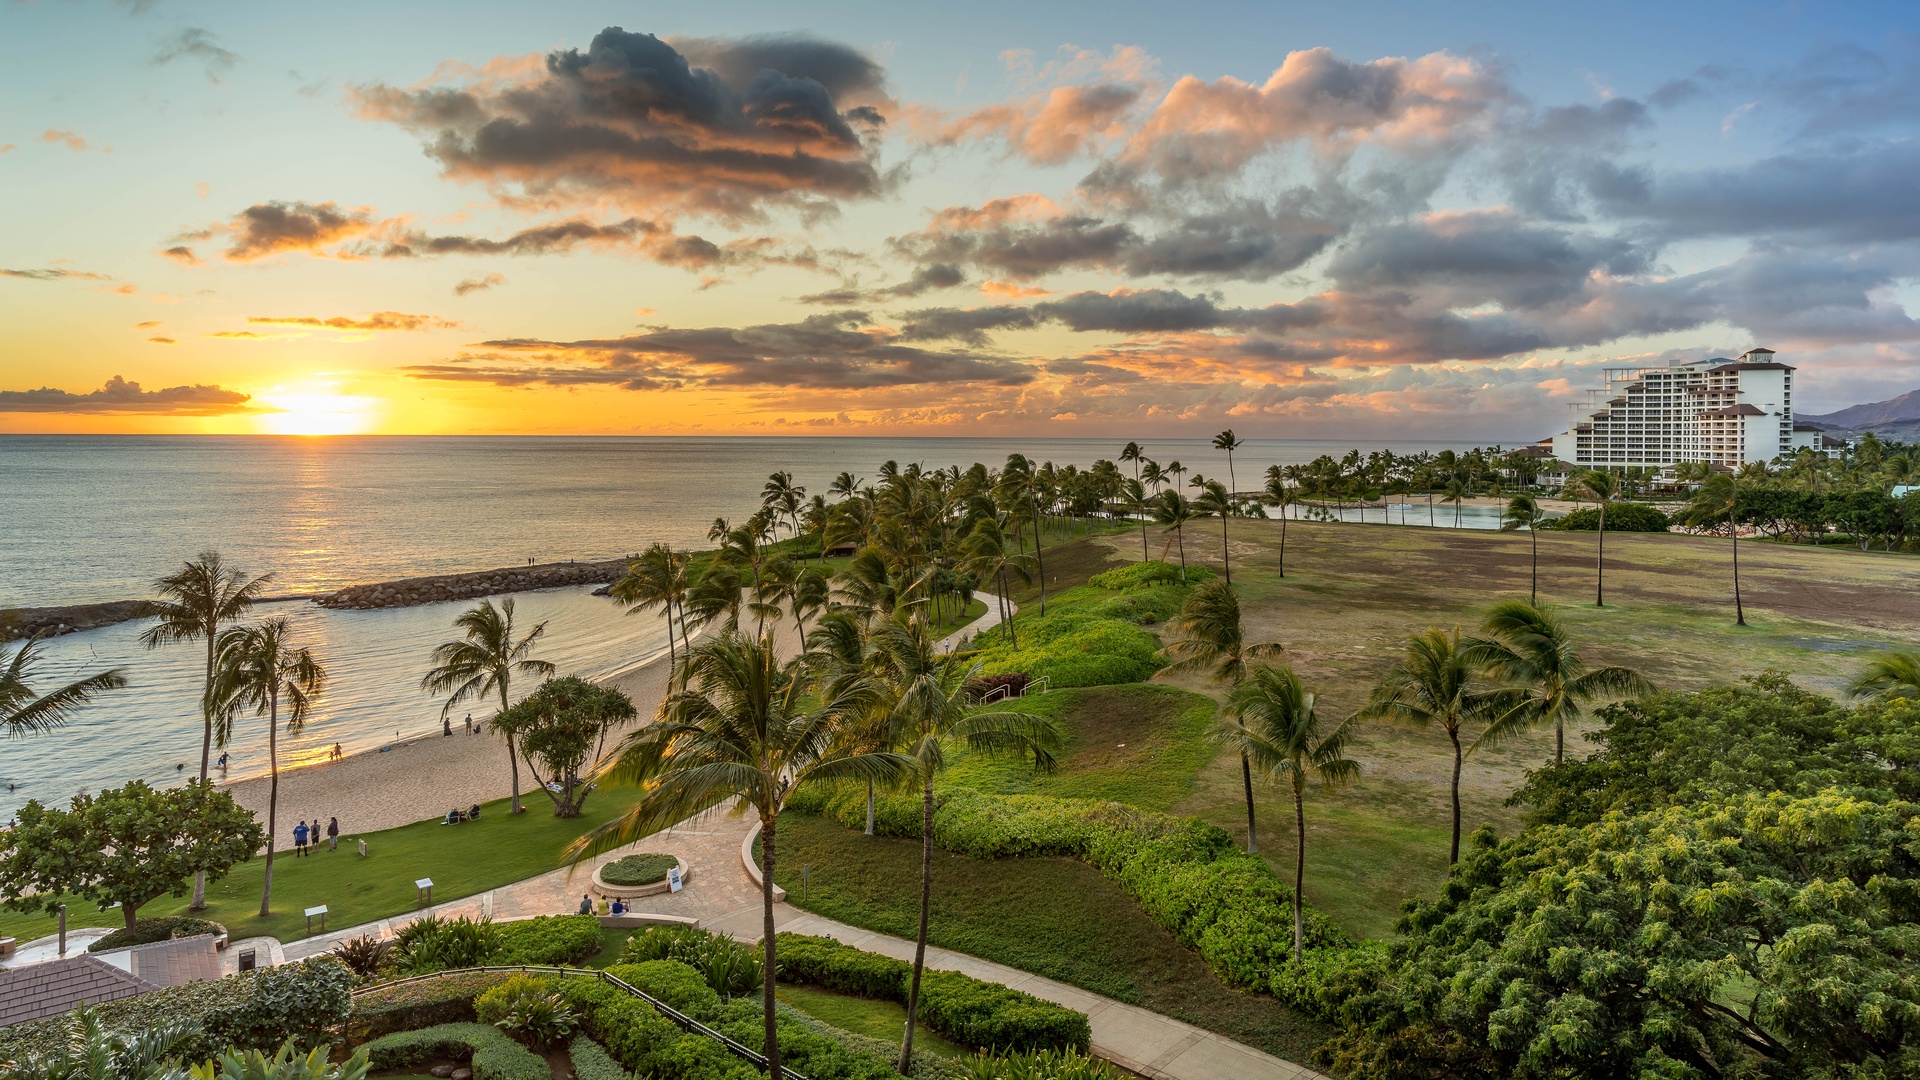 Kapolei Vacation Rentals, Ko Olina Beach Villas B706 - Another lovely picture of the island.